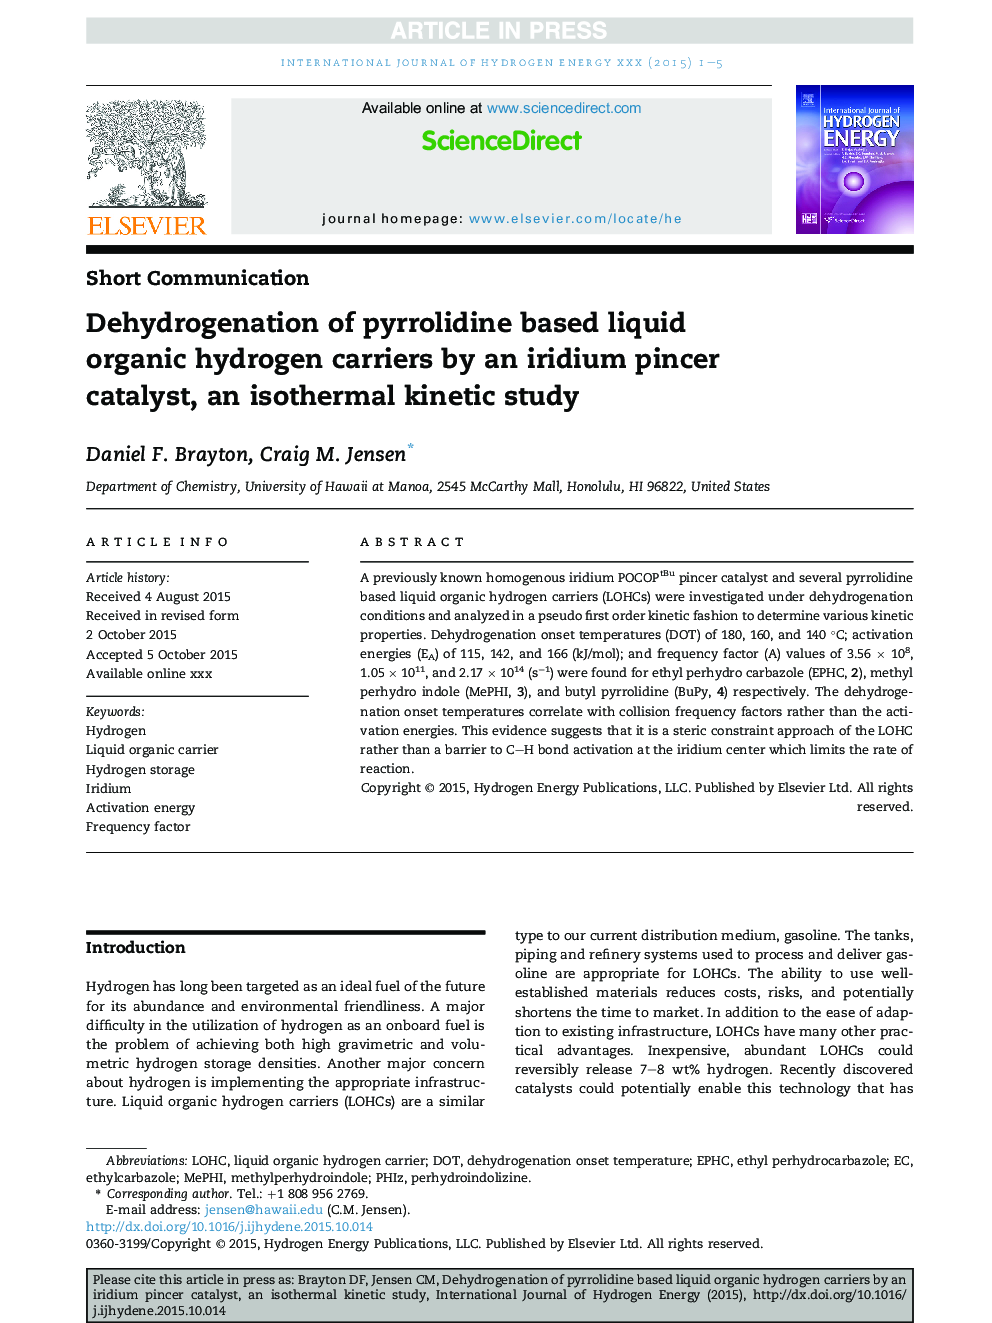 Dehydrogenation of pyrrolidine based liquid organic hydrogen carriers by an iridium pincer catalyst, an isothermal kinetic study